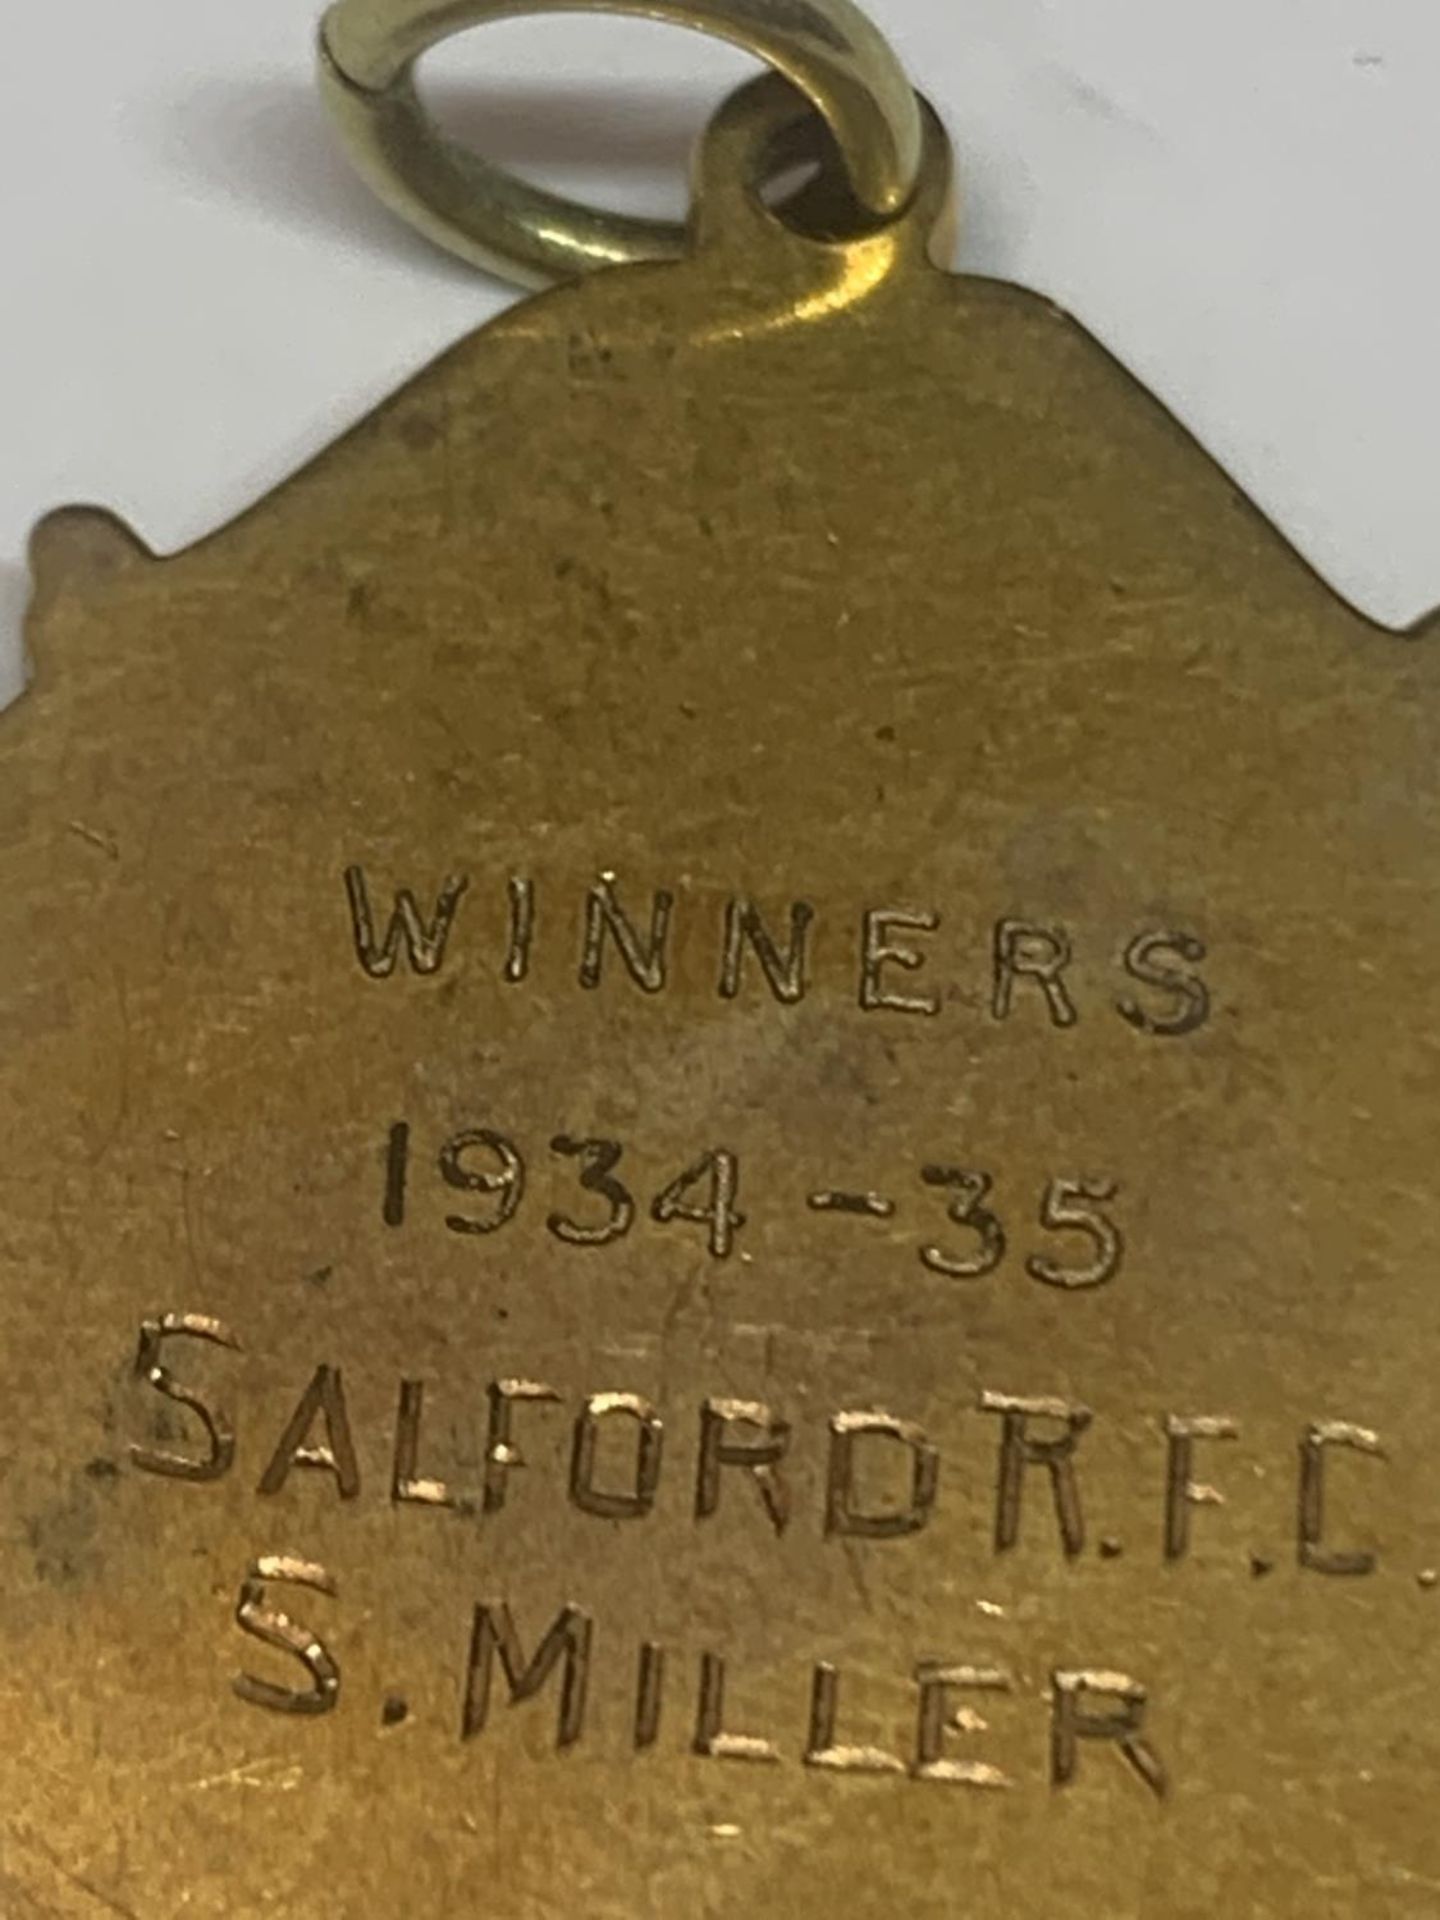 A HALLMARKED 9 CARAT GOLD LANCASHIRE RUGBY LEAGUE MEDAL ENGRAVED WINNERS 1934-35 SALFORD R.F.C S. - Image 3 of 6